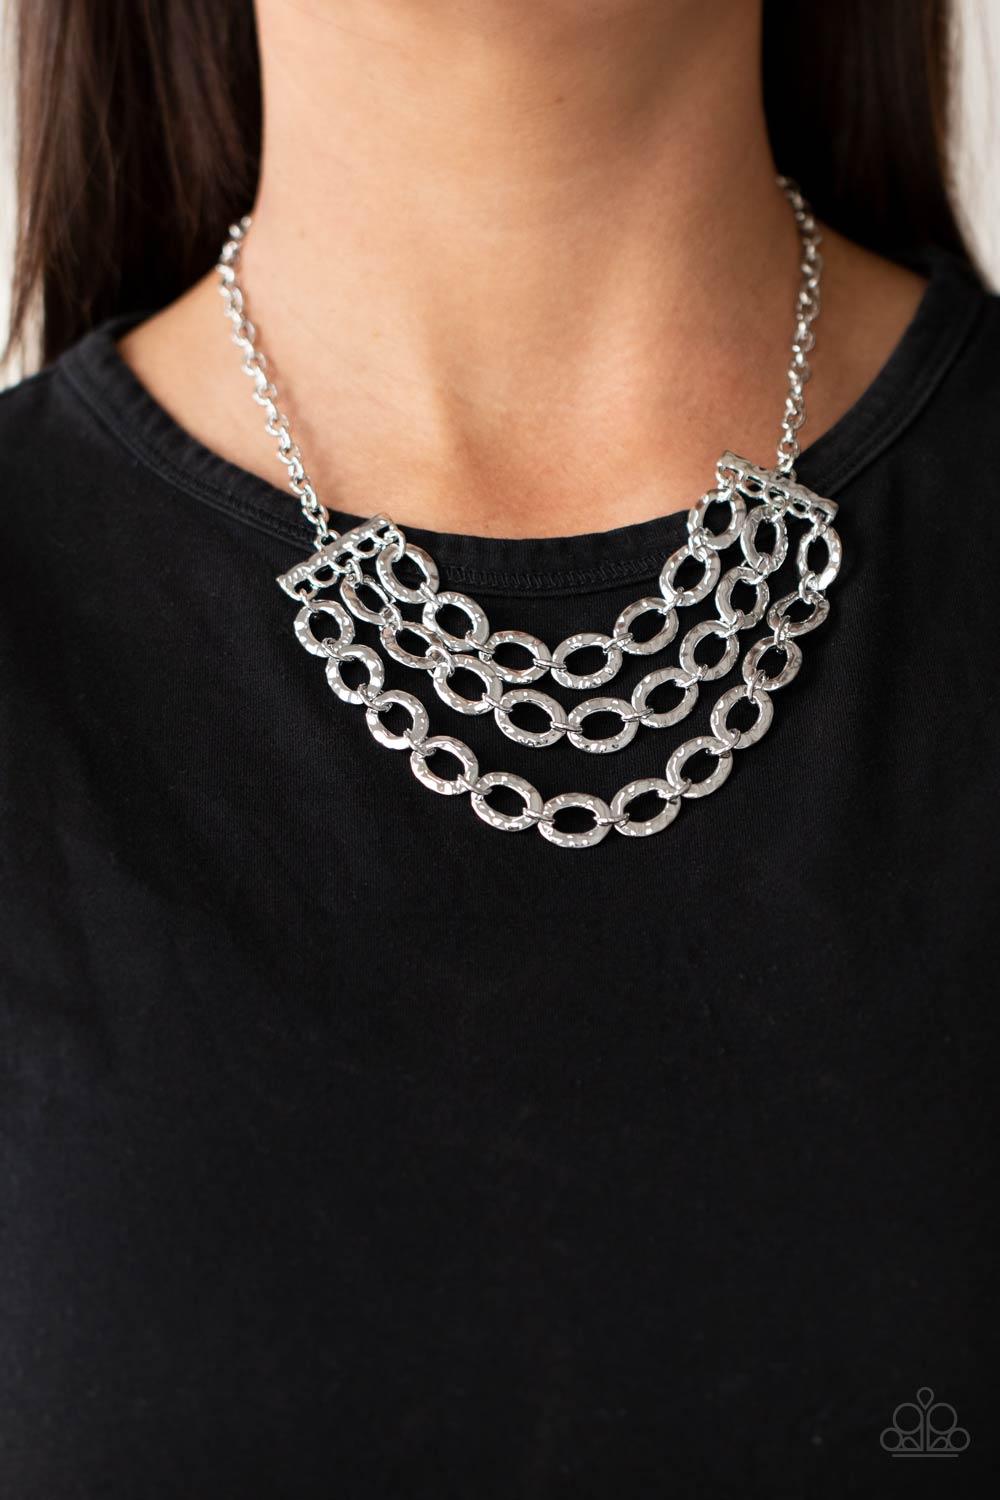 Paparazzi Accessories Repeat After Me - Silver Three rows of shiny silver chains with oversized hammered oval links attach to silver bars for an edgy display below the collar. Features an adjustable clasp closure. Sold as one individual necklace. Includes